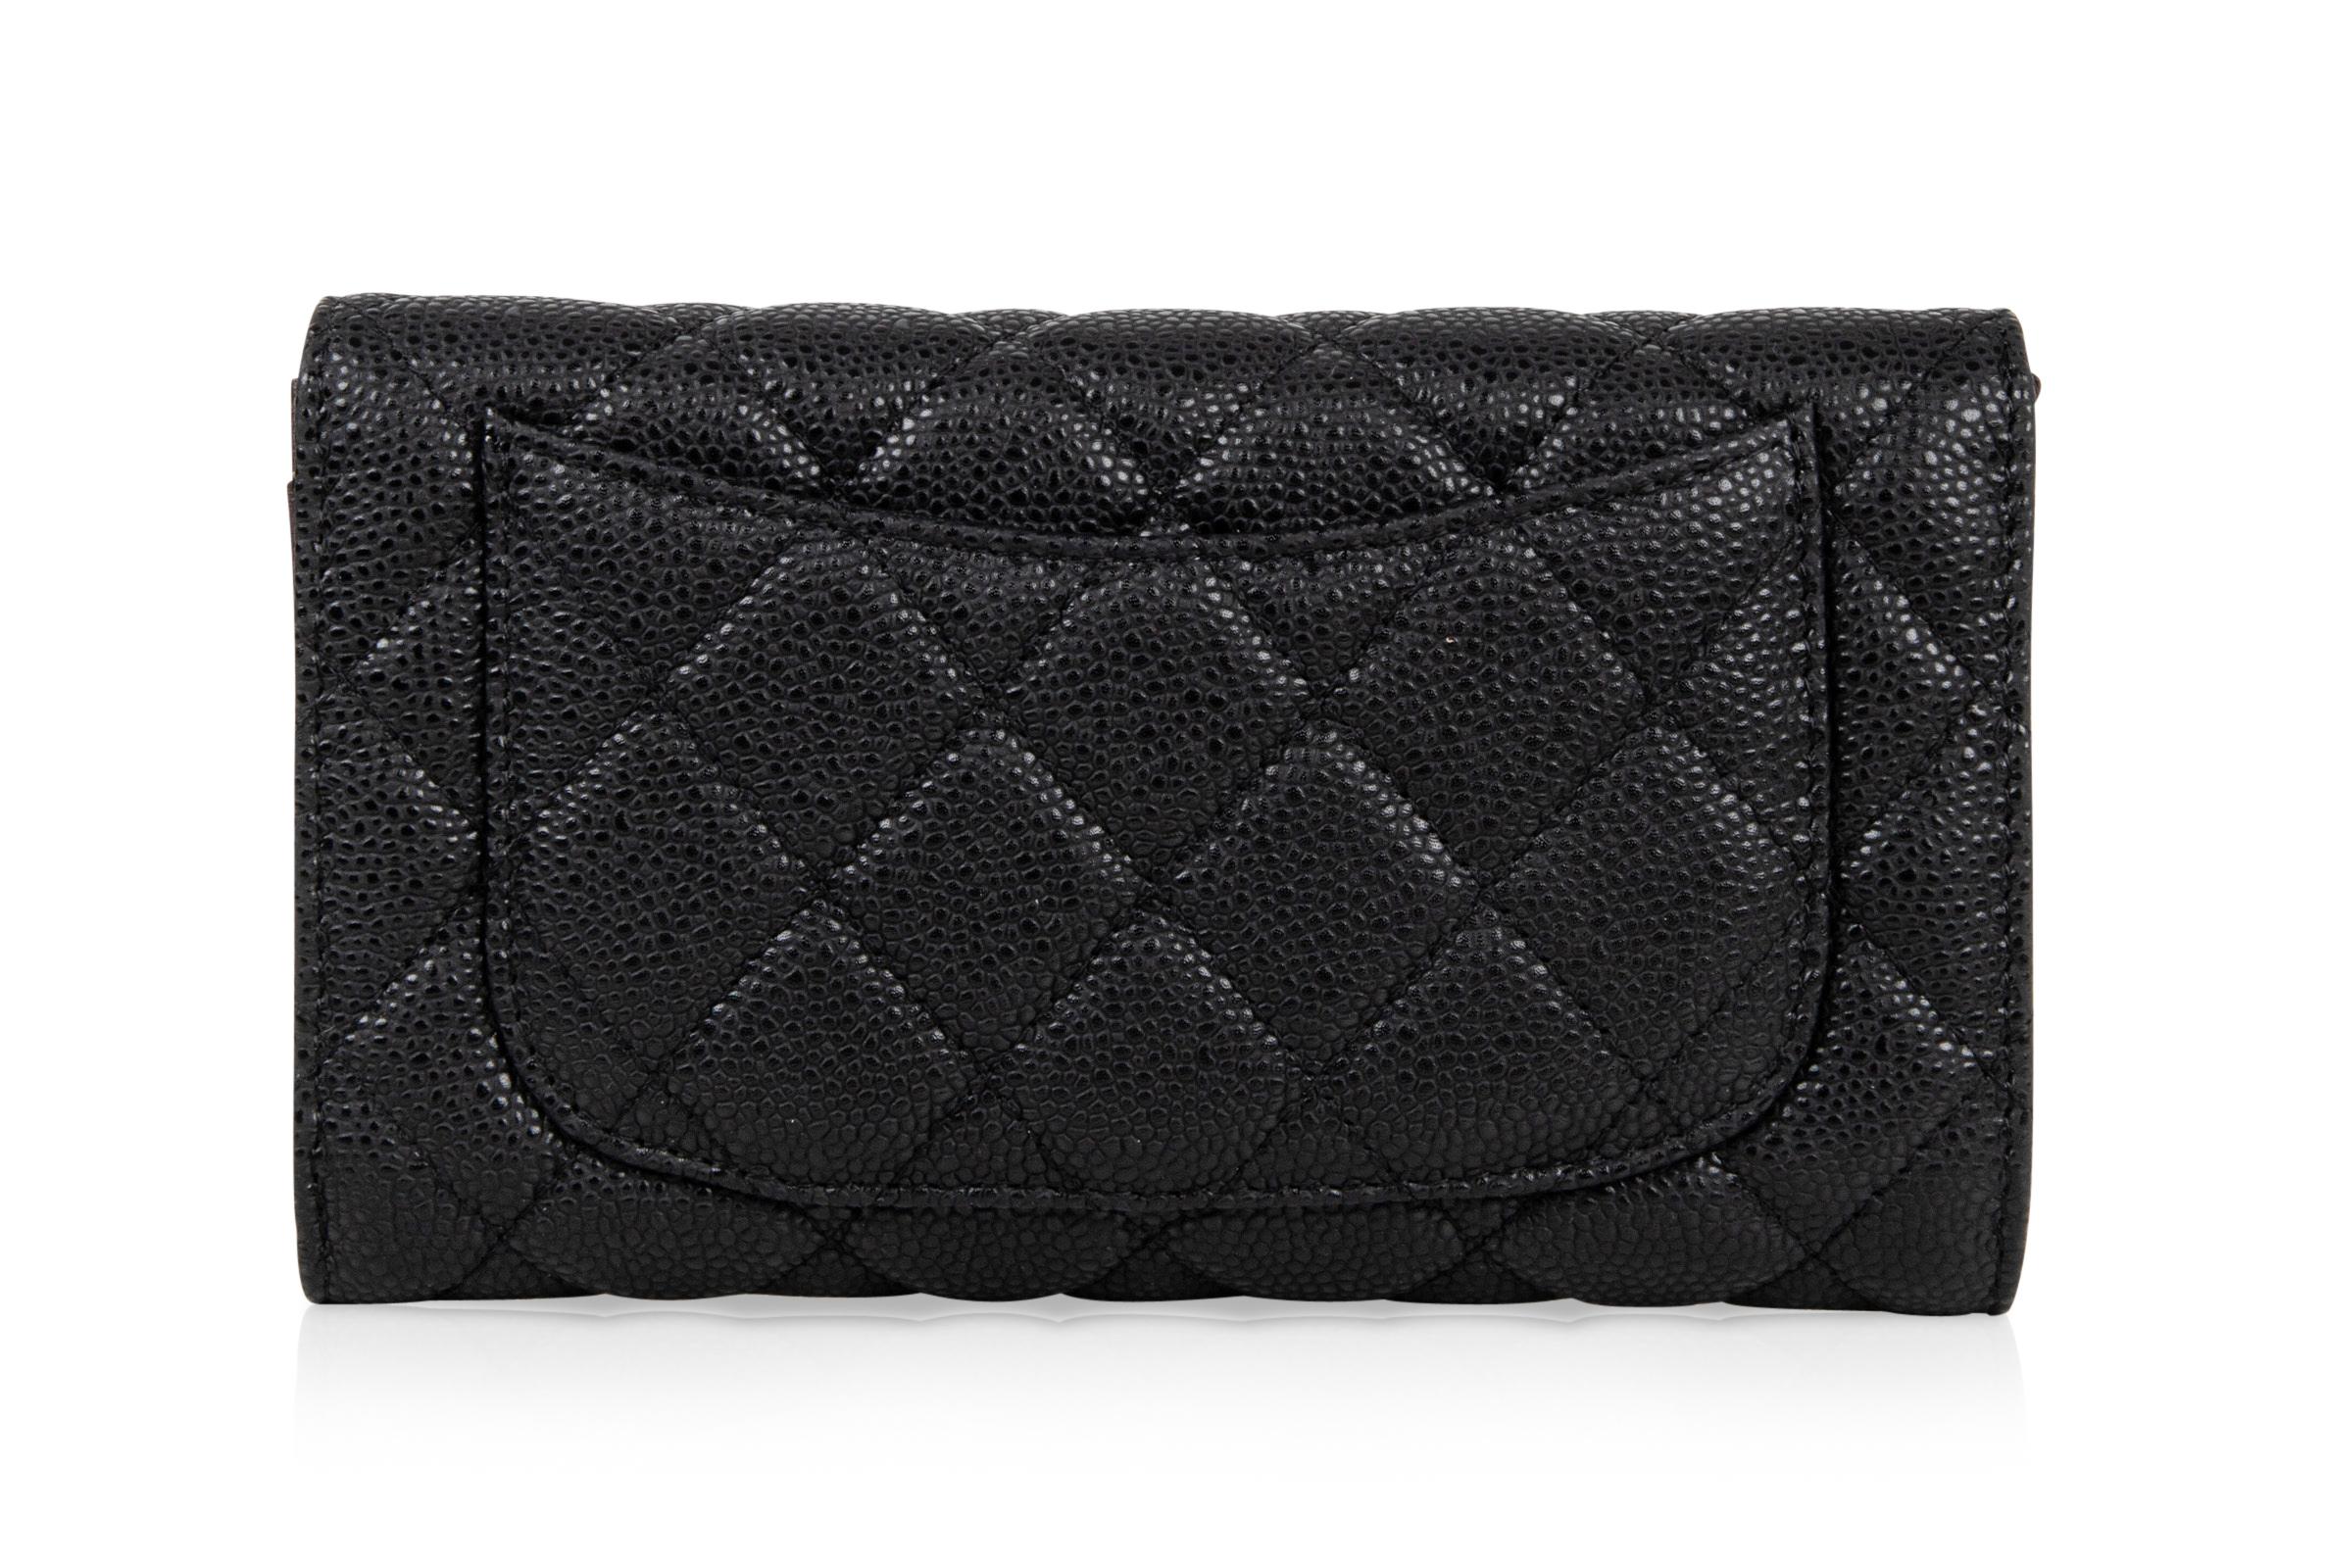 Chanel Wallet Classic Long Black Caviar Leather New 1